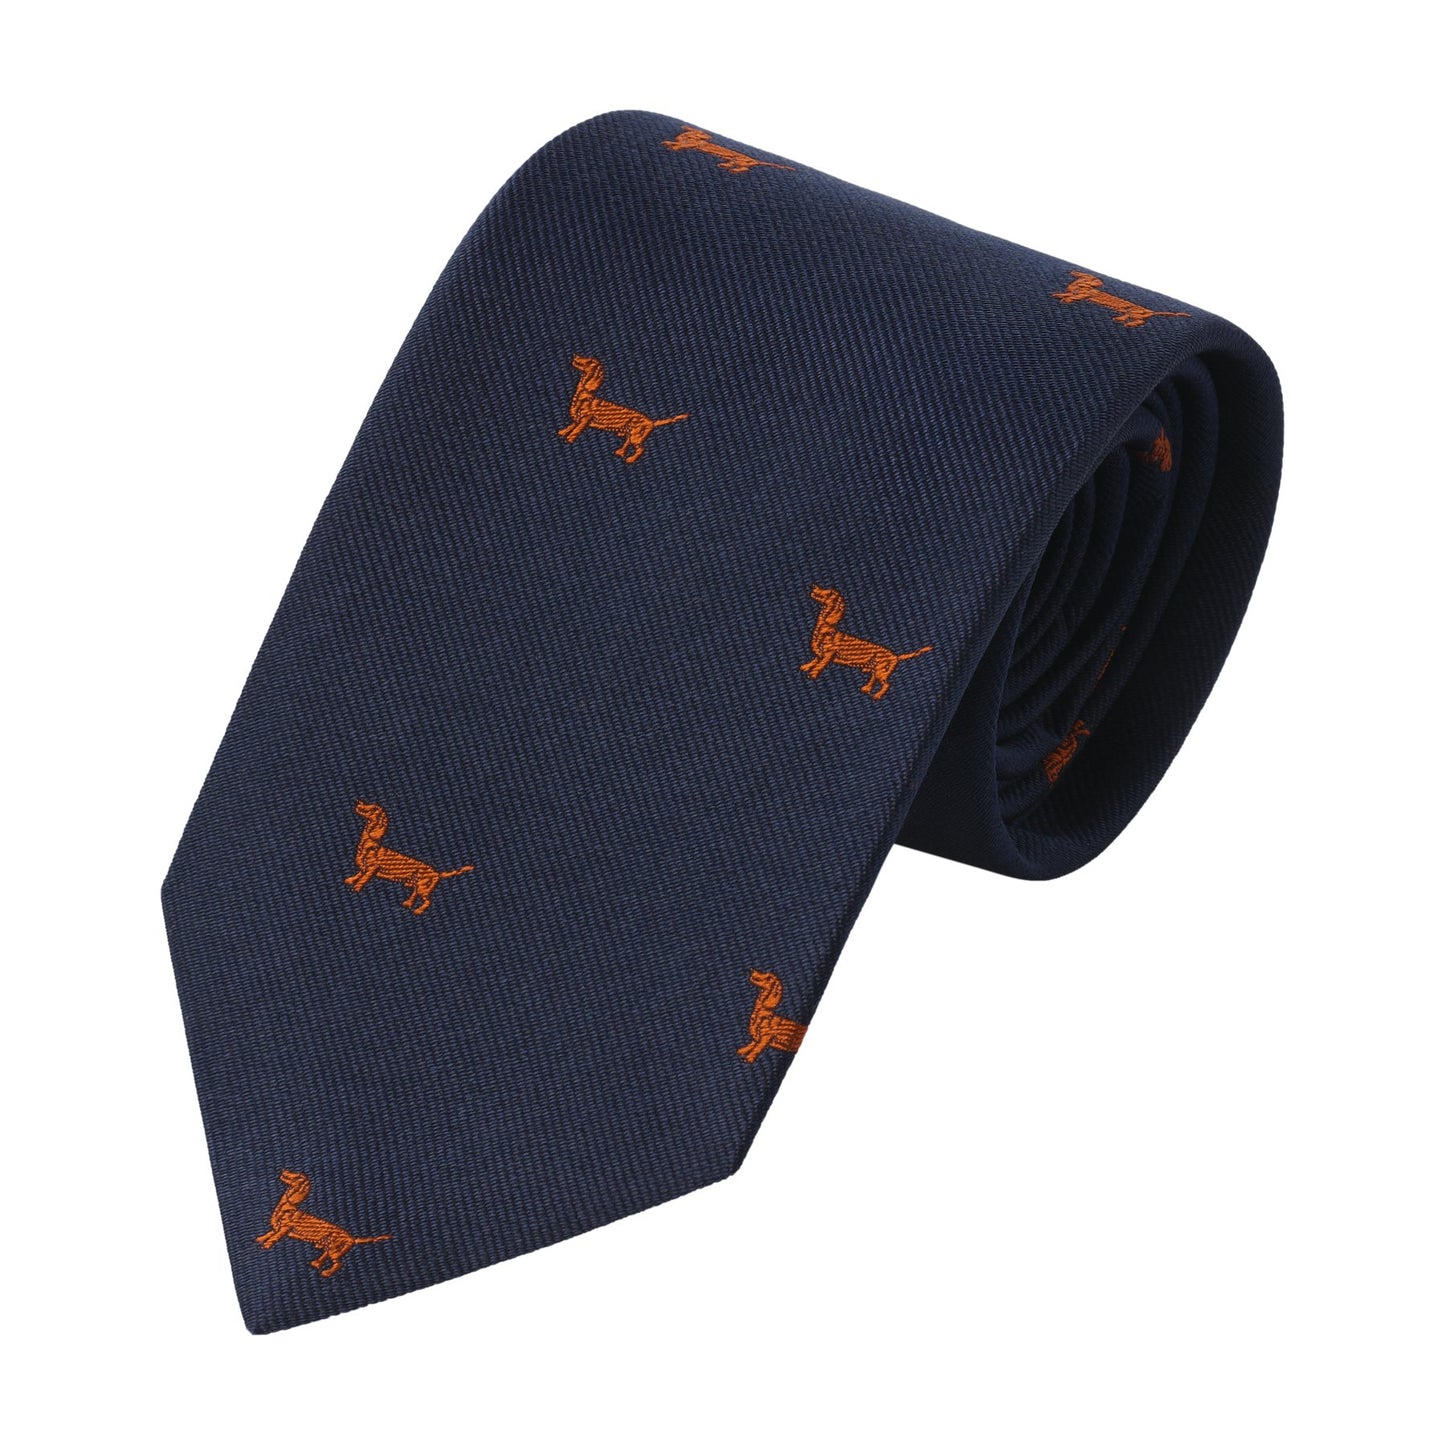 Drake's Embroidered Woven Silk Navy Tie with Design - SARTALE